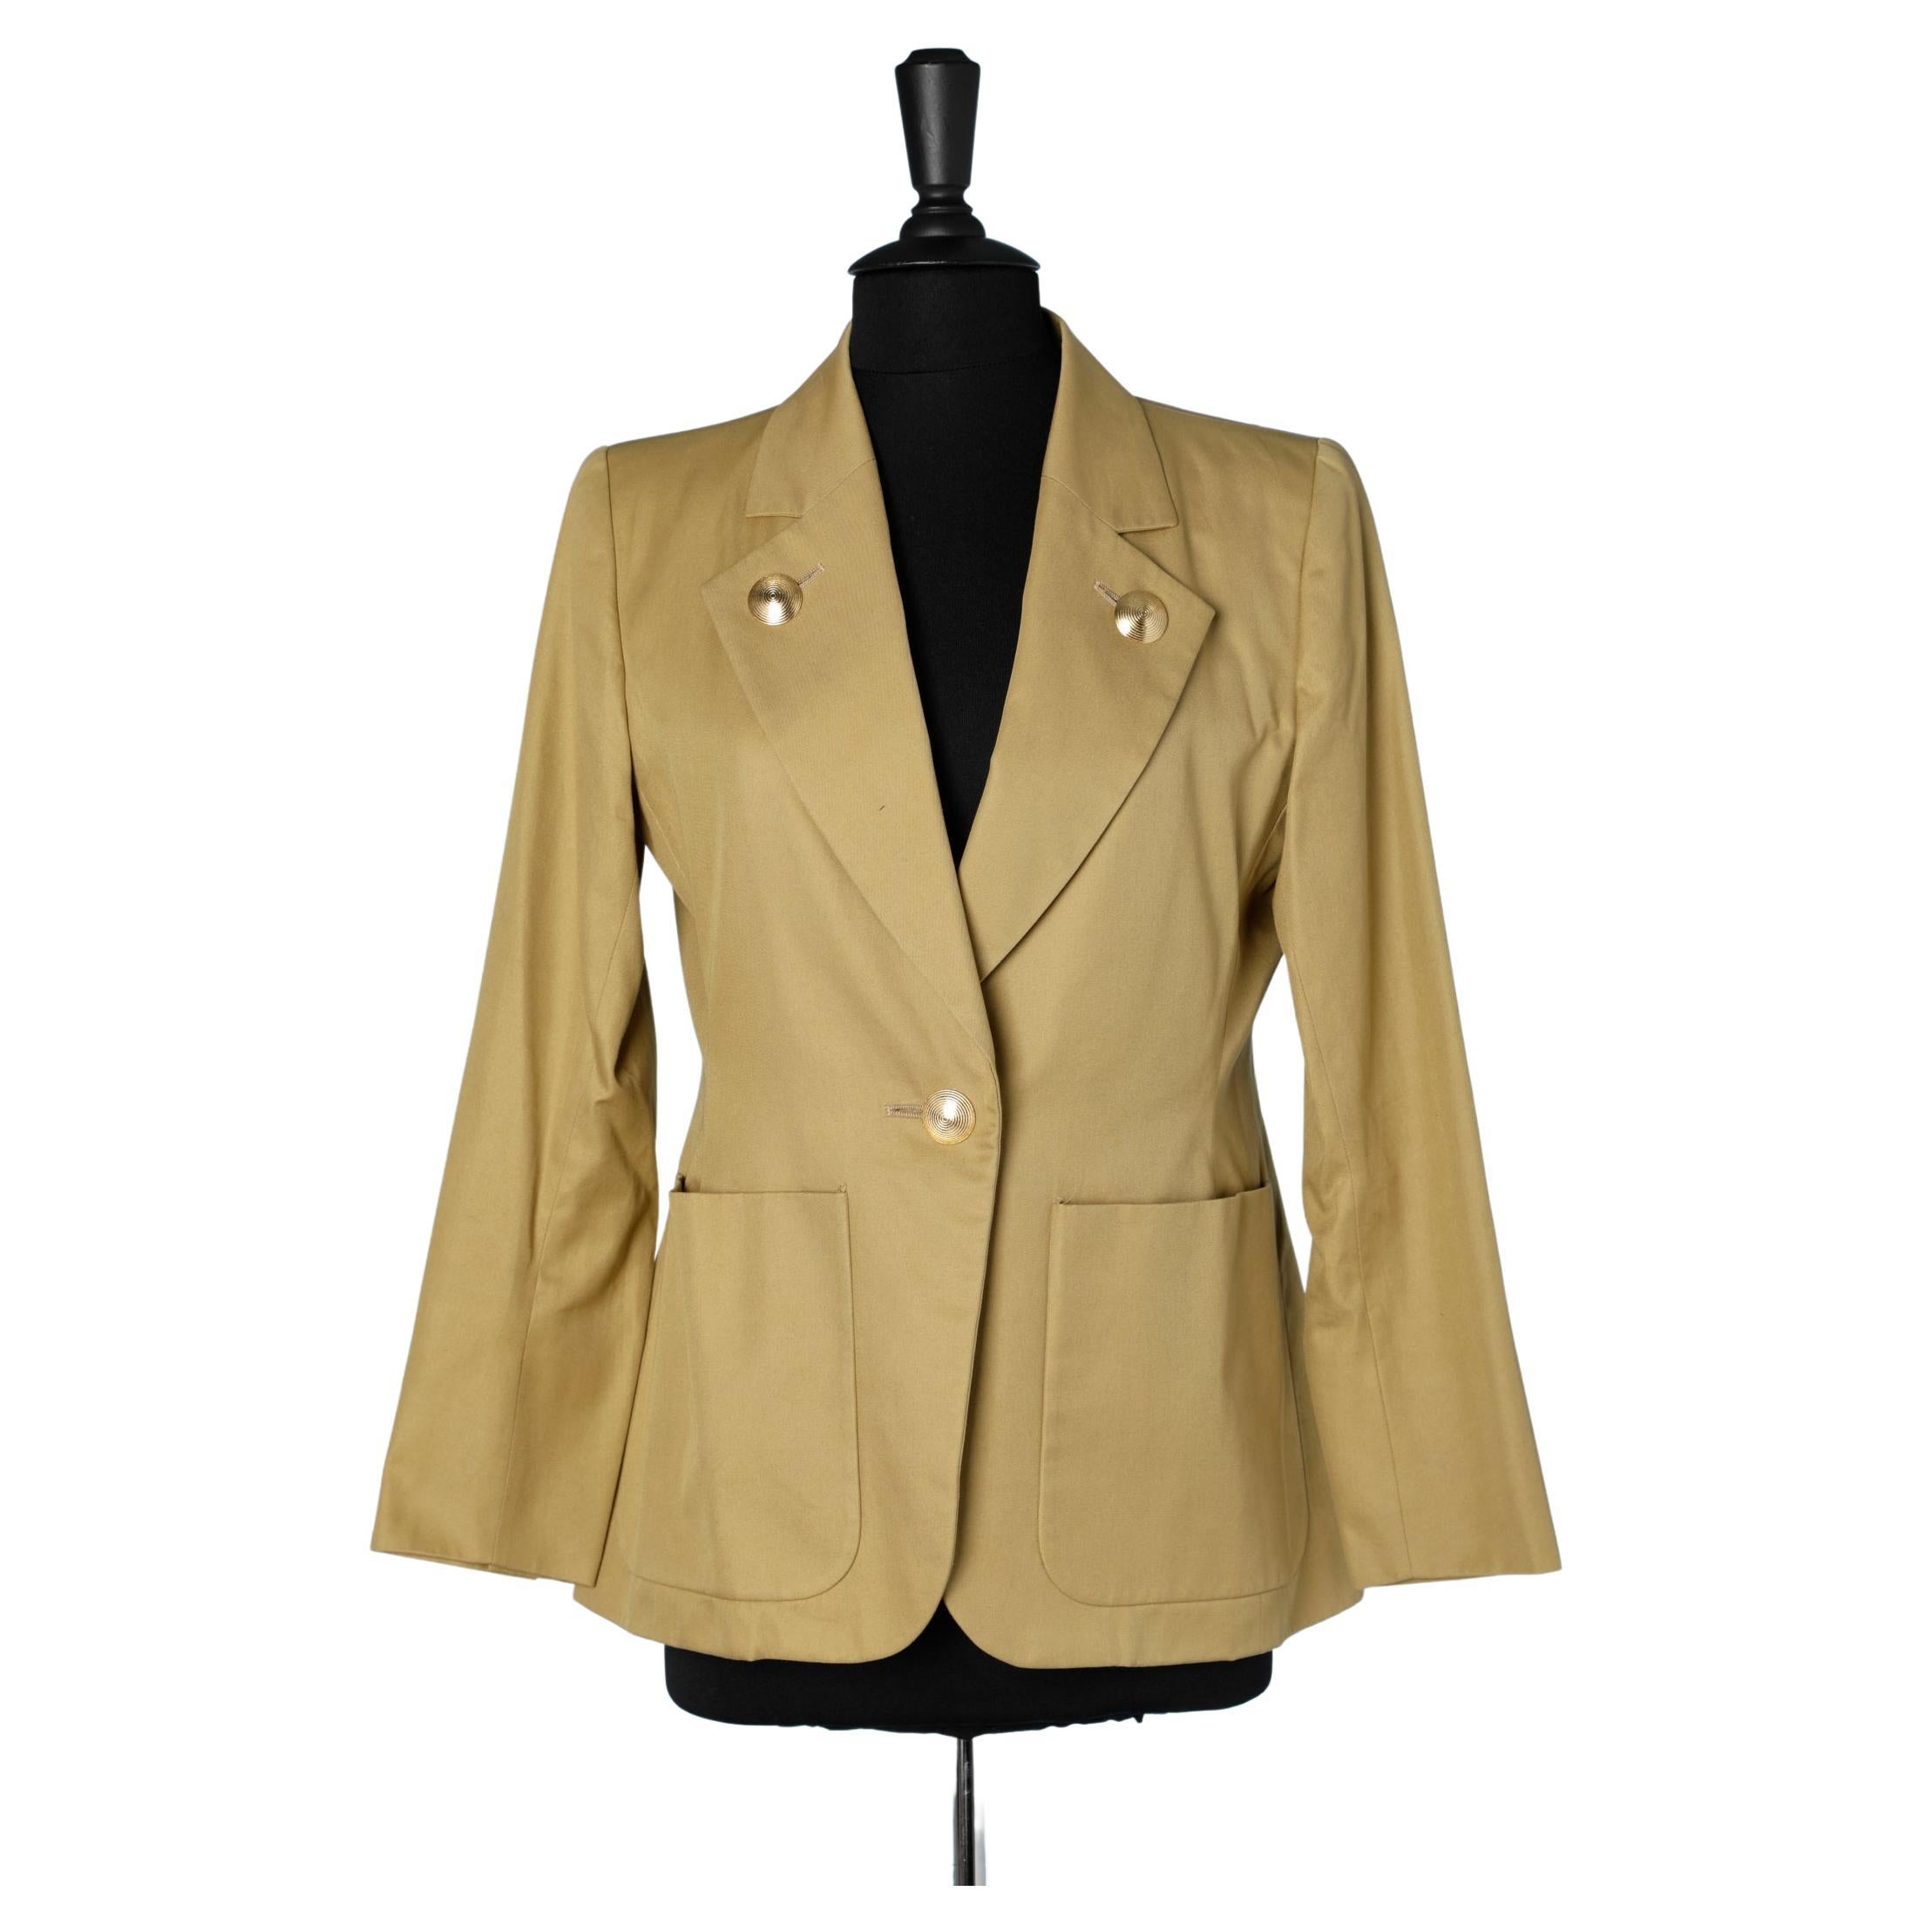 Mustard green cotton  jacket with gold metal buttons YSL Rive Gauche  For Sale